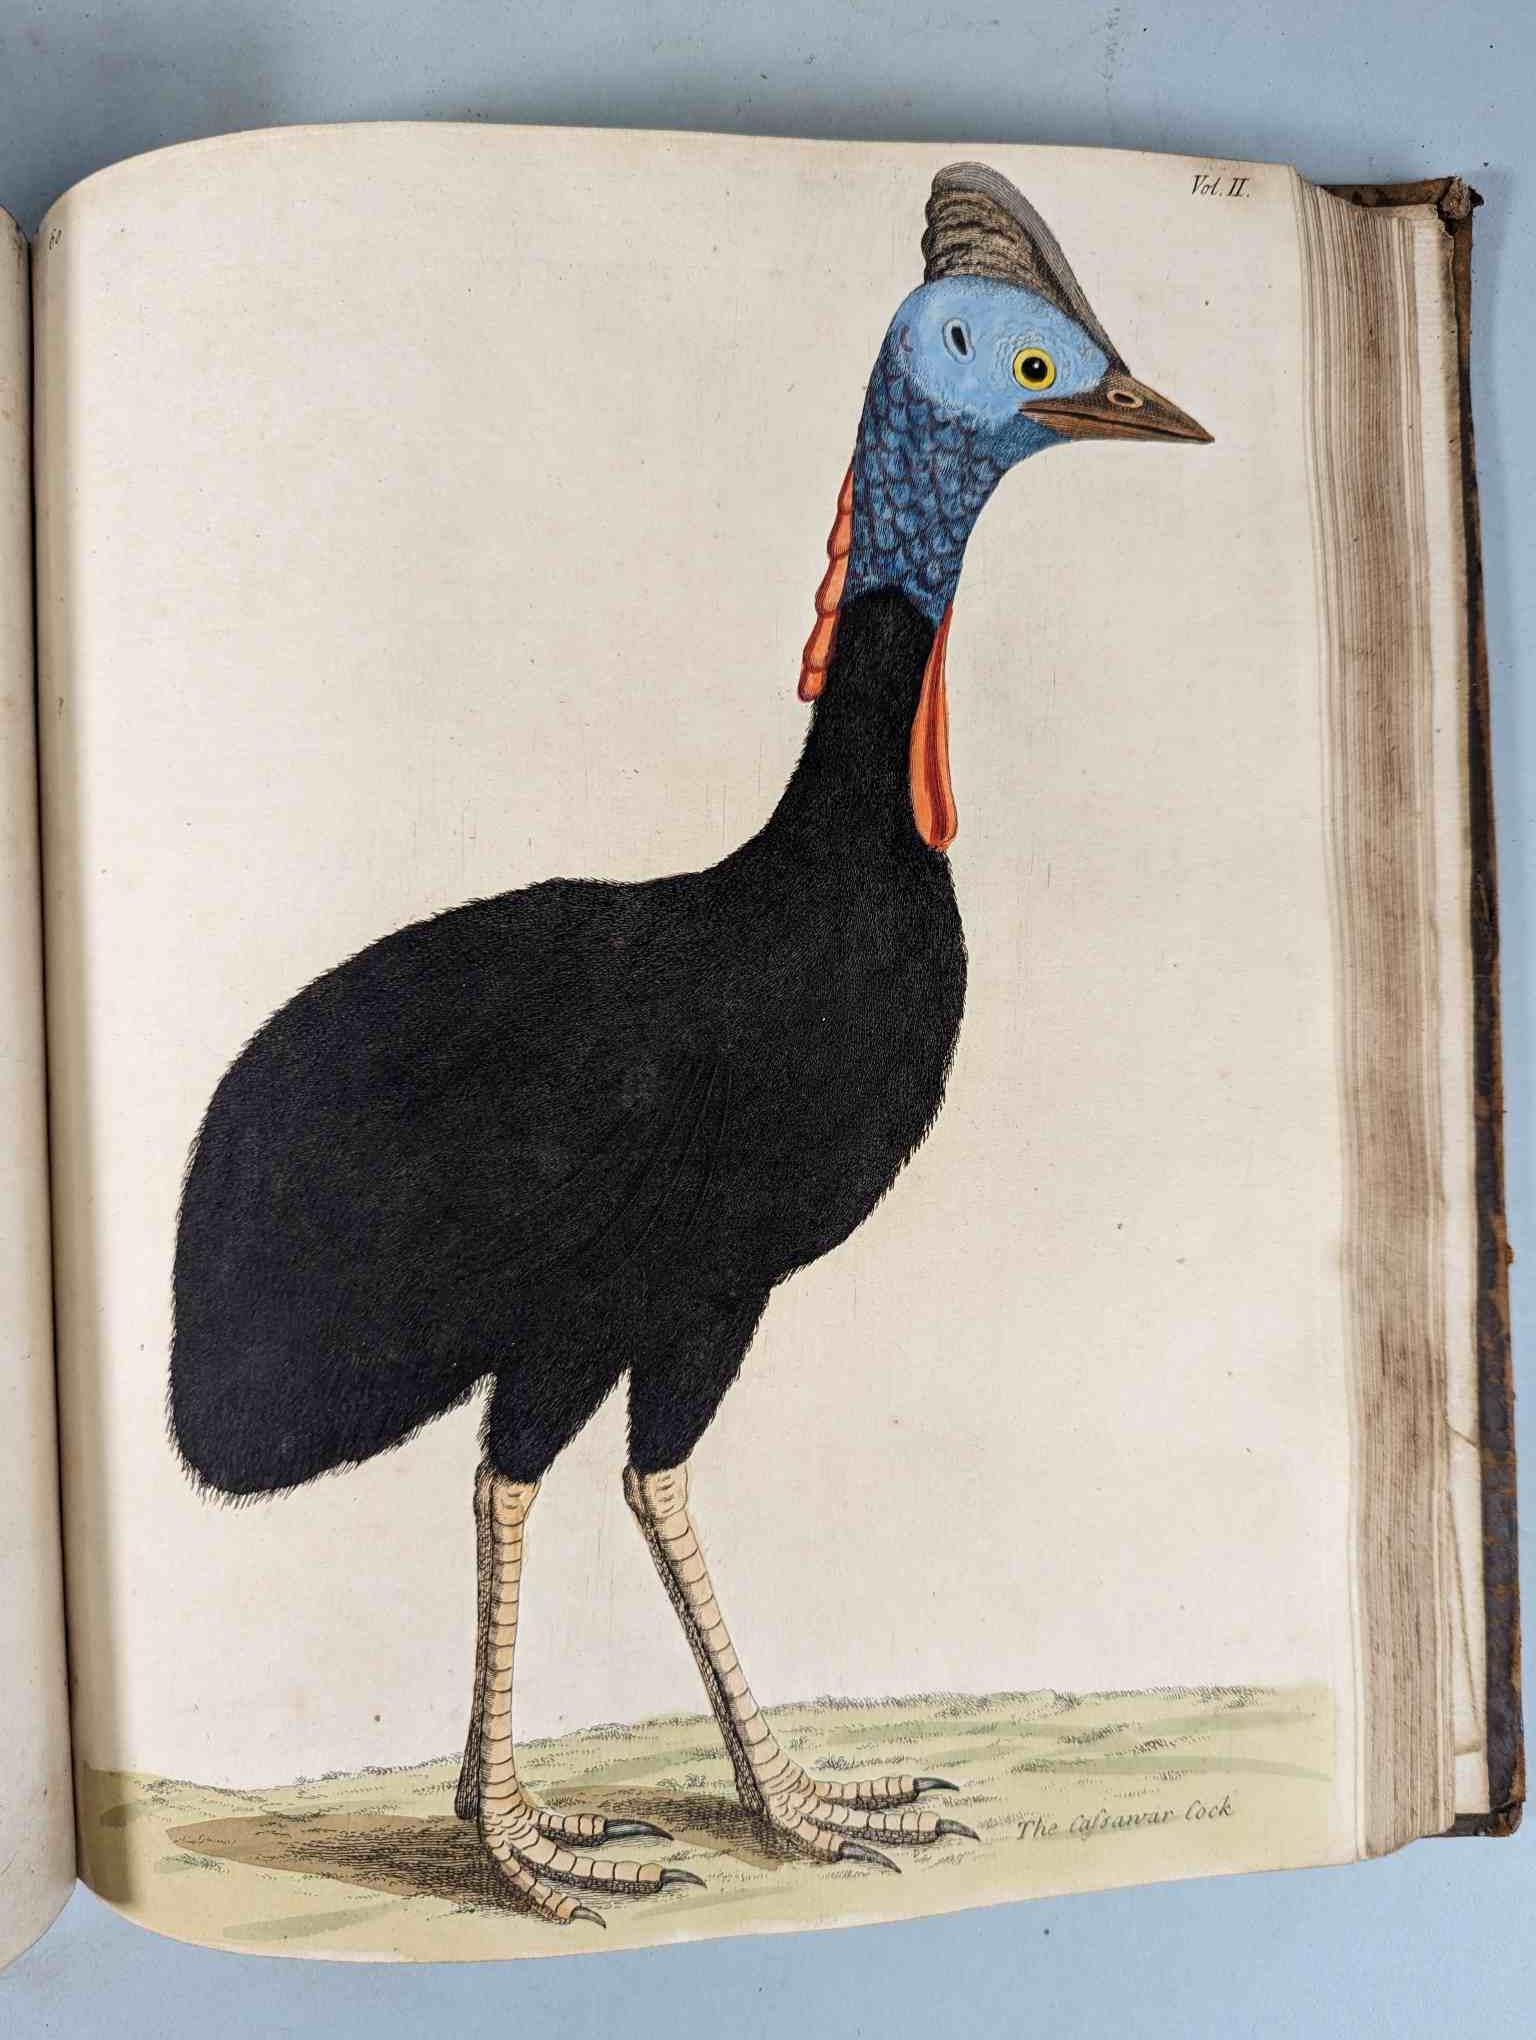 ALBIN, Eleazar. A Natural History of Birds, to which are added, Notes and Observations by W. - Image 164 of 208